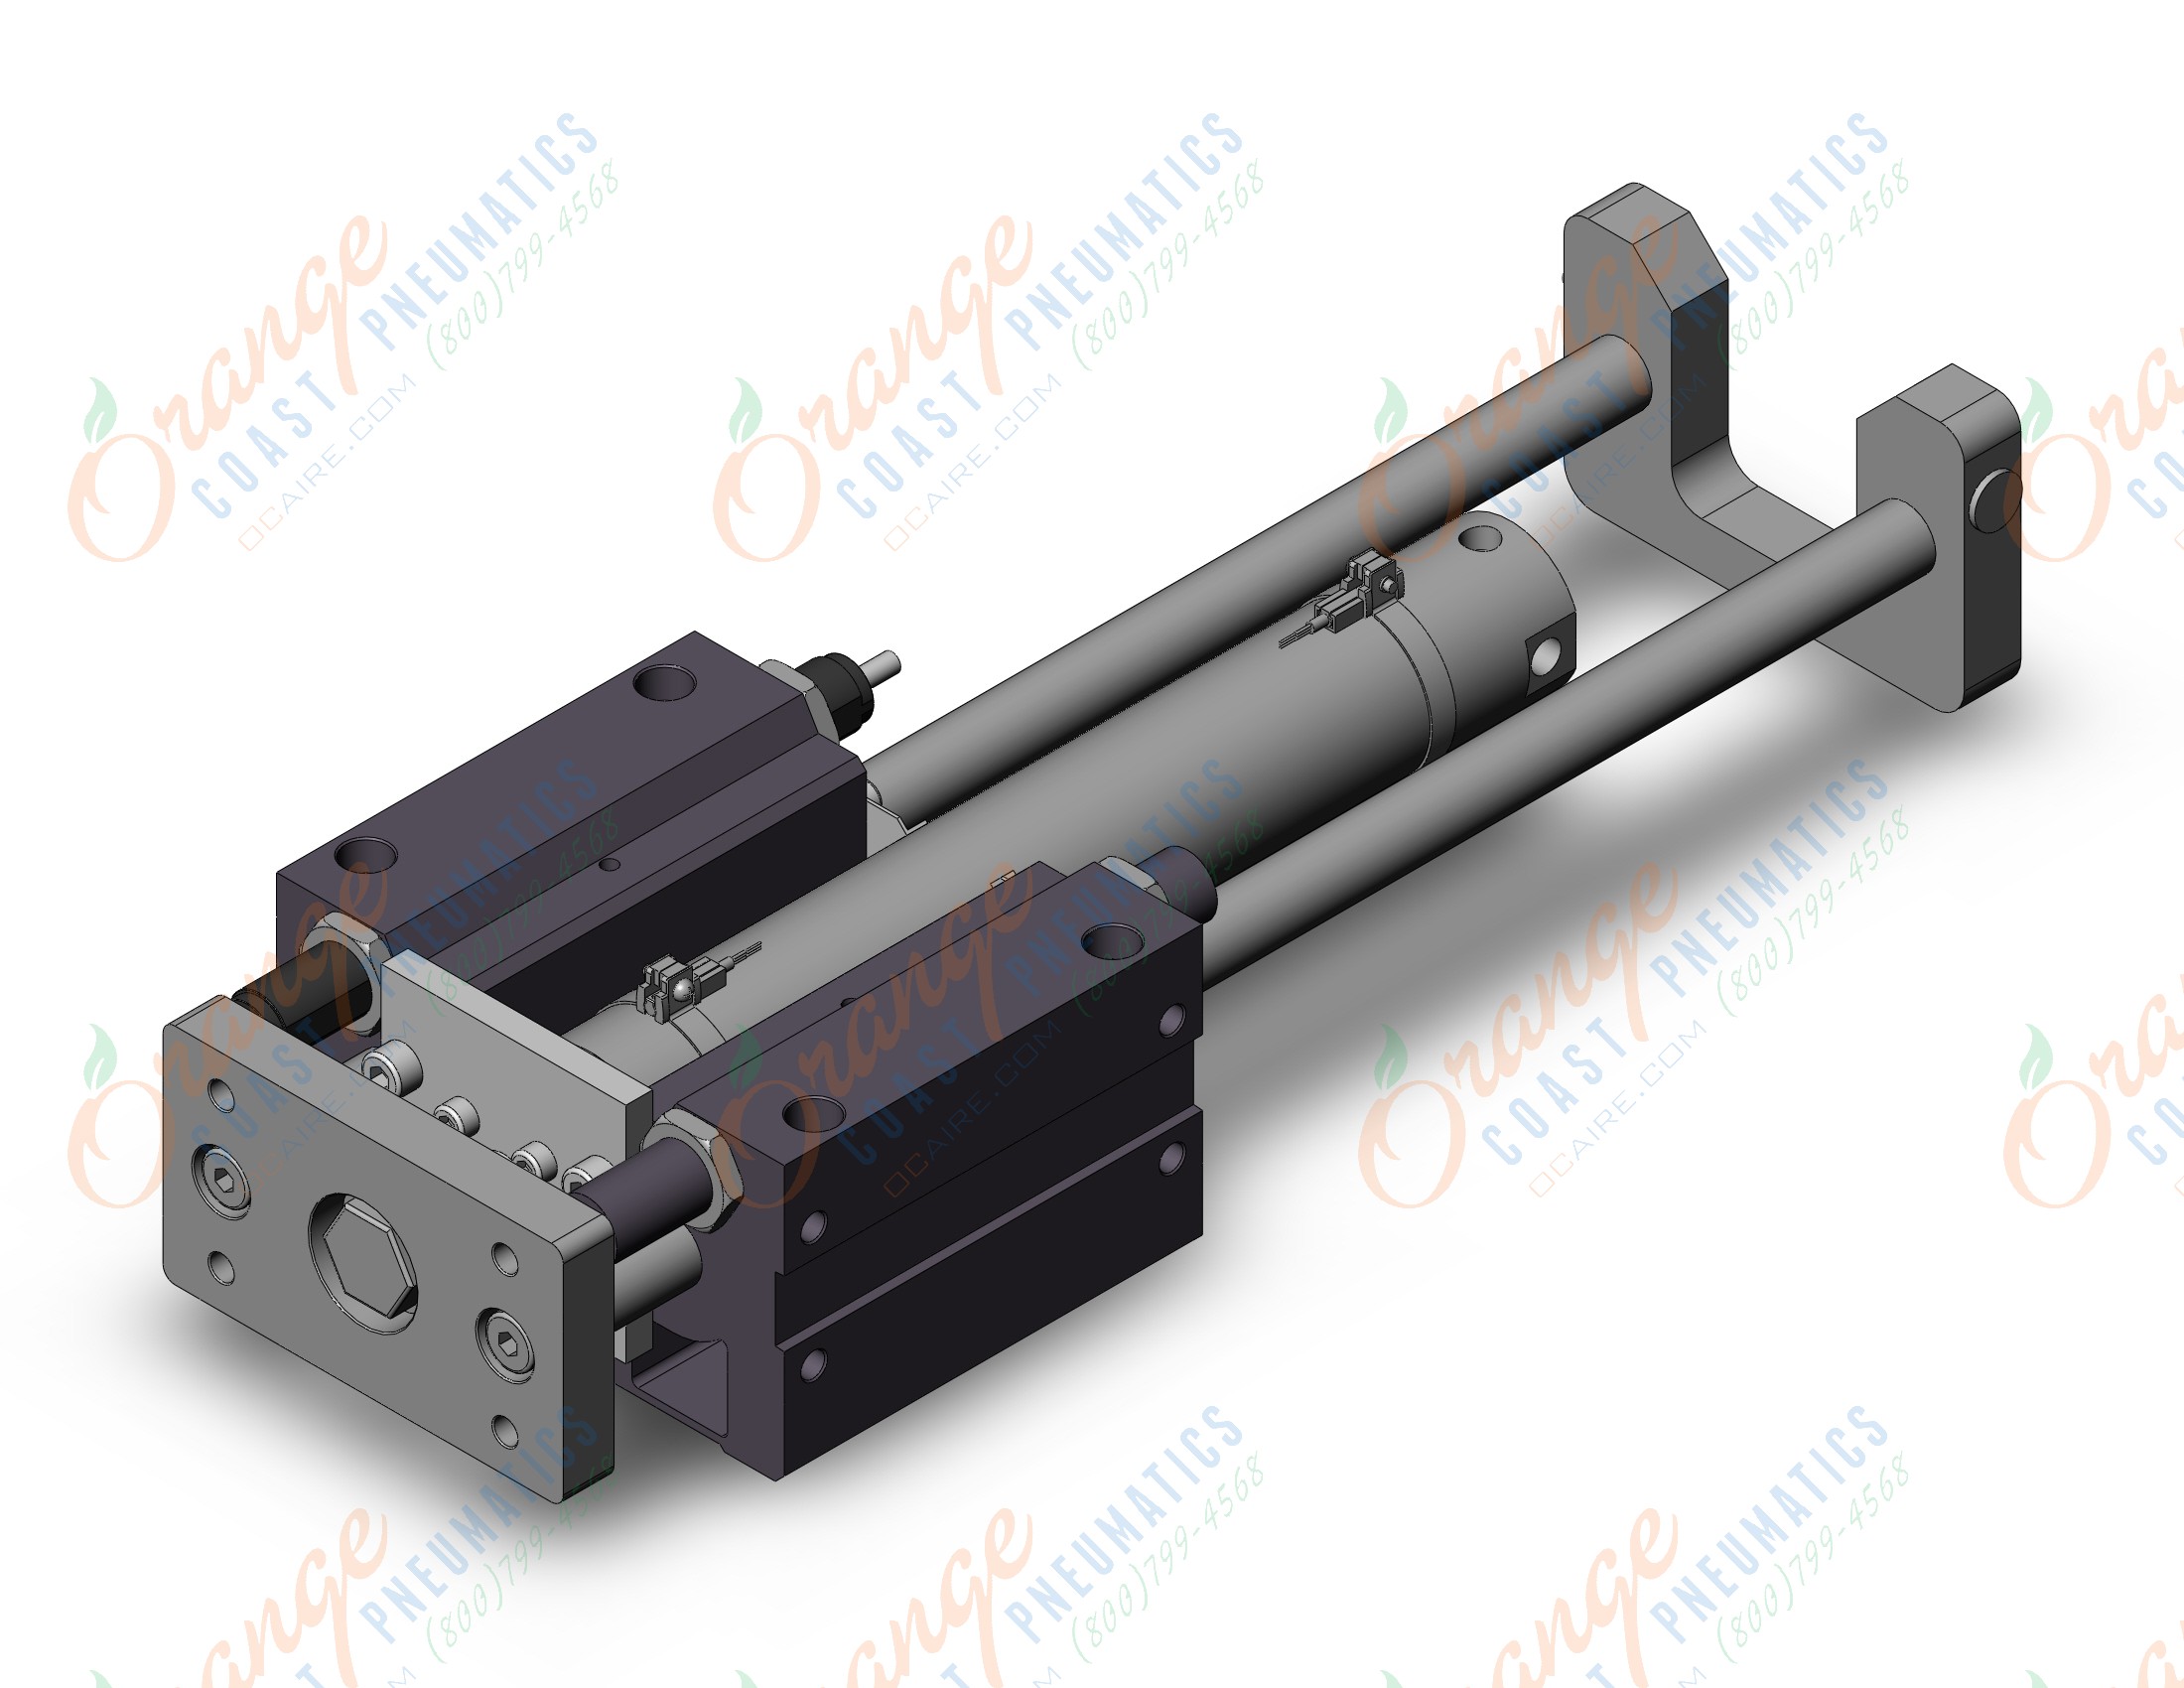 SMC MGGLB40TN-250-M9PM mgg, guide cylinder, GUIDED CYLINDER